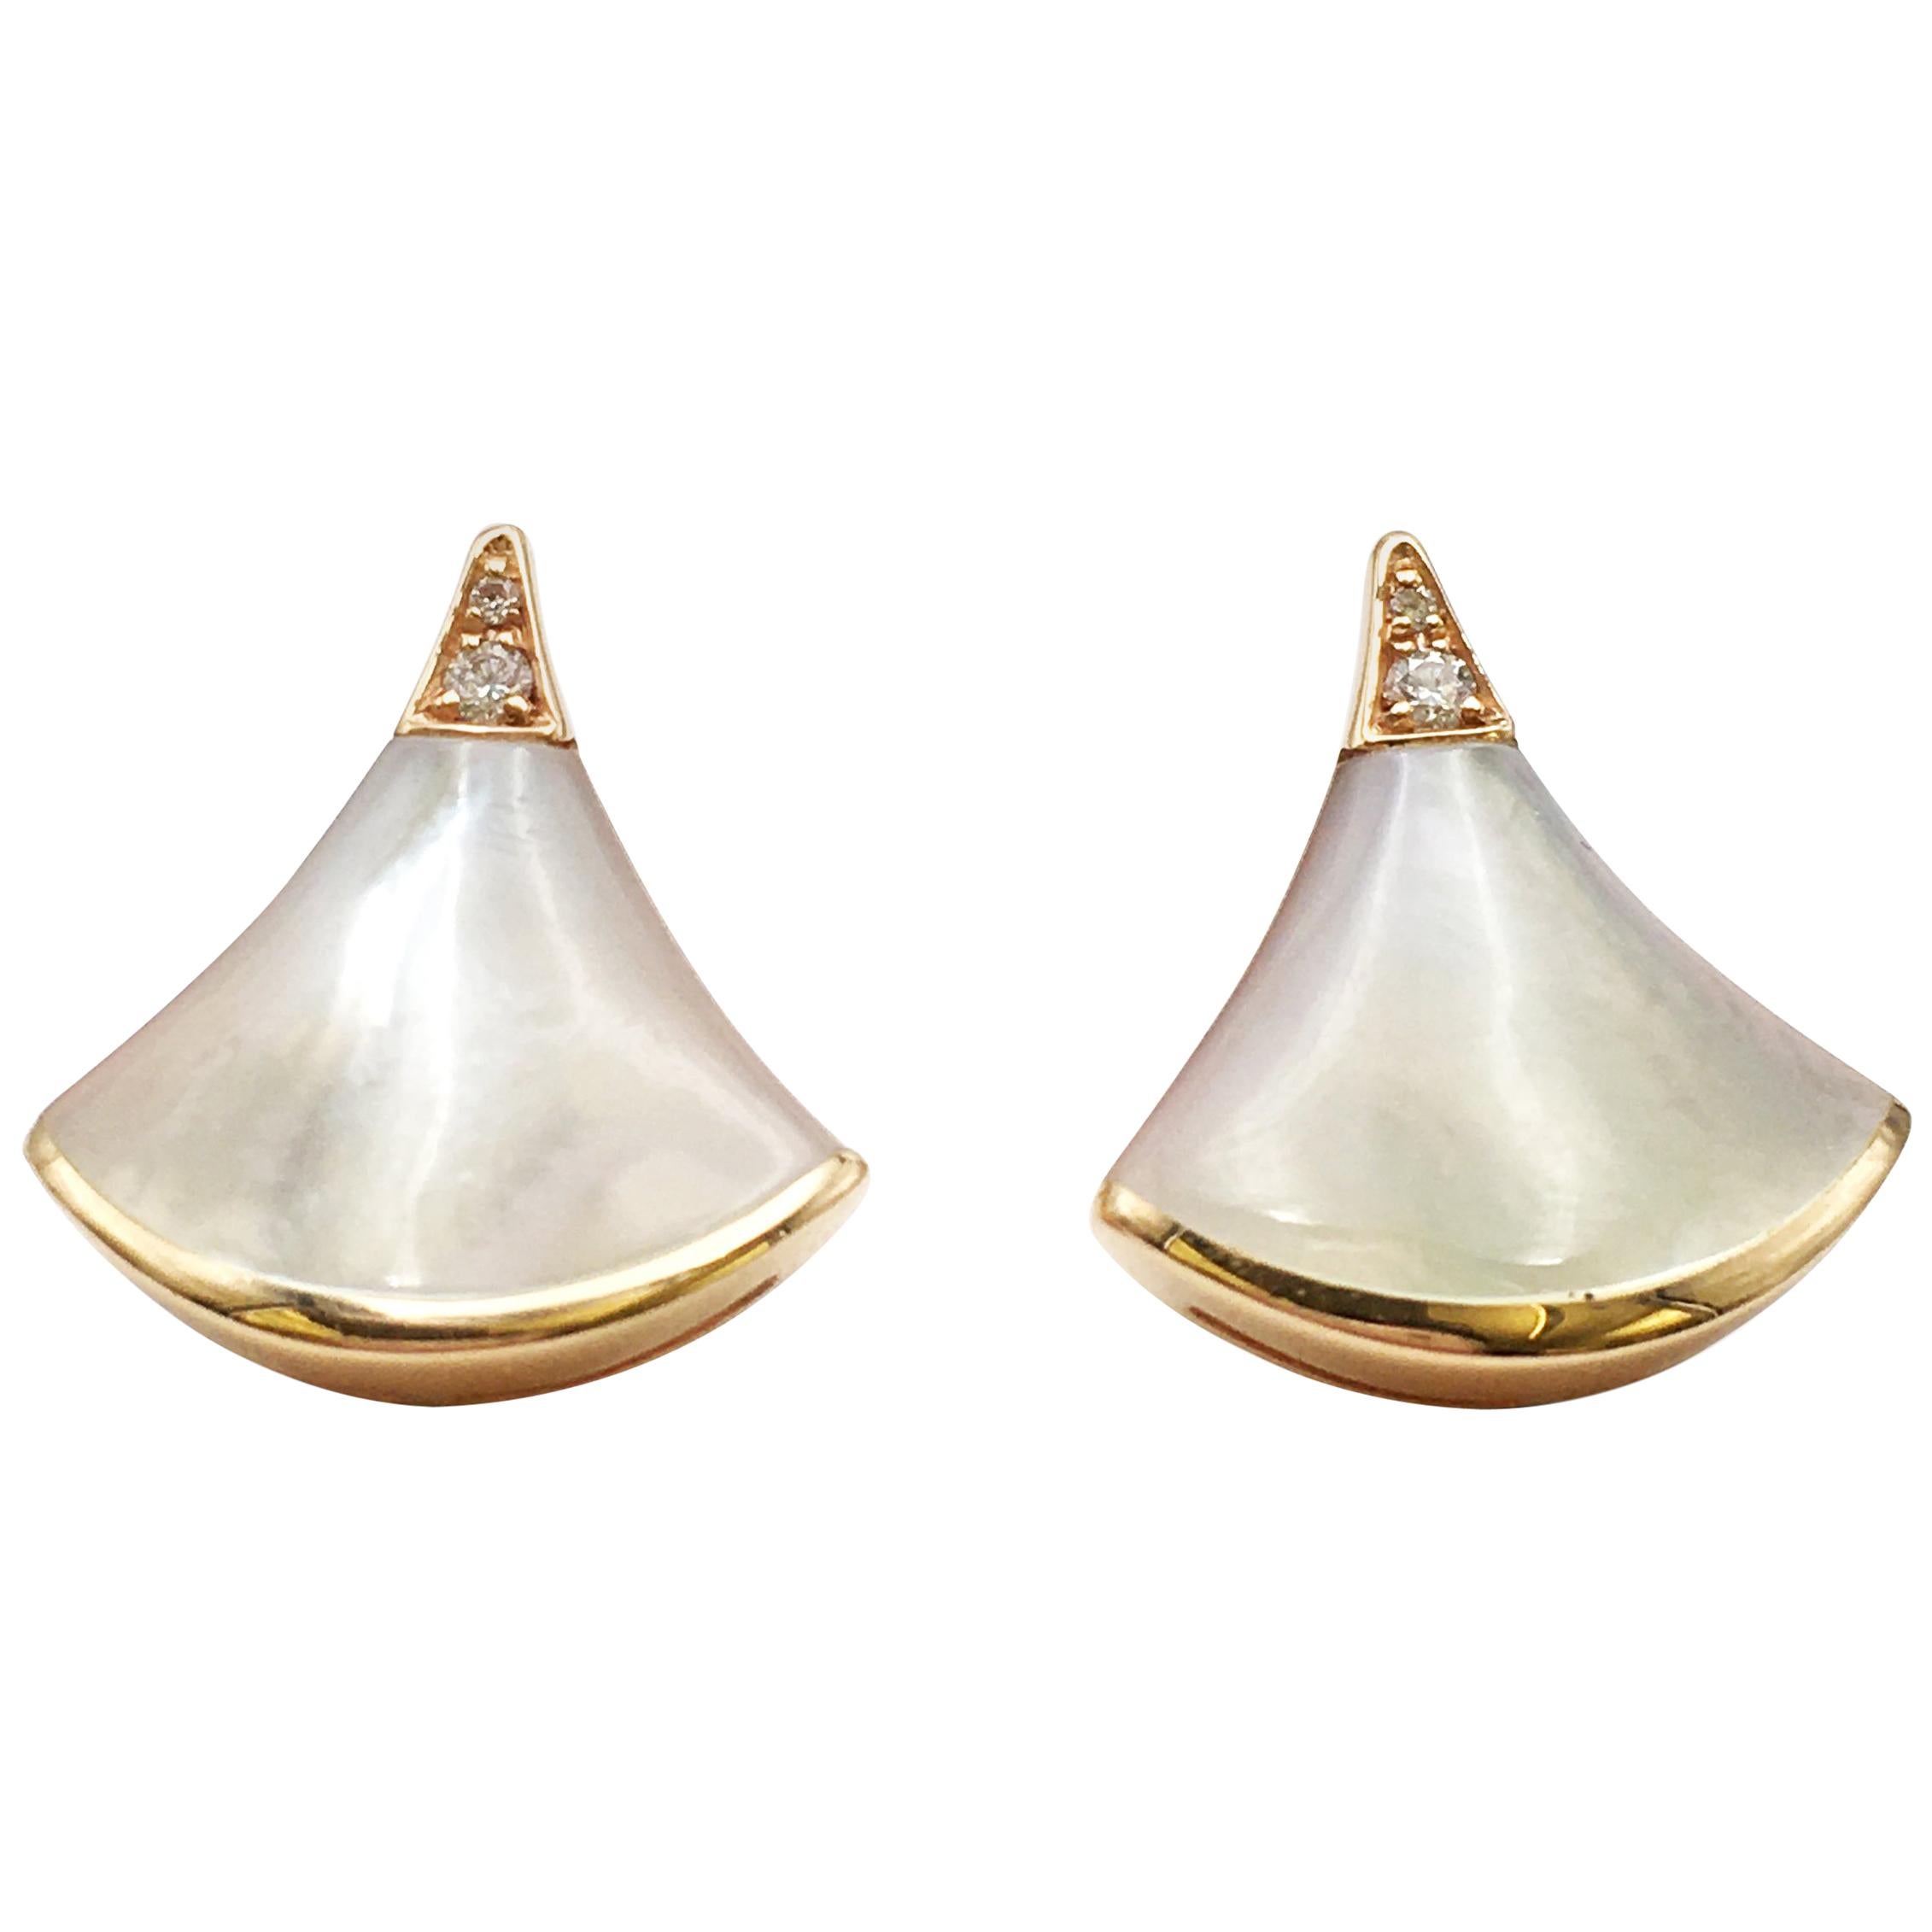 Bvlgari 'Diva's Dream' Gold Mother of Pearl and Diamond Earrings